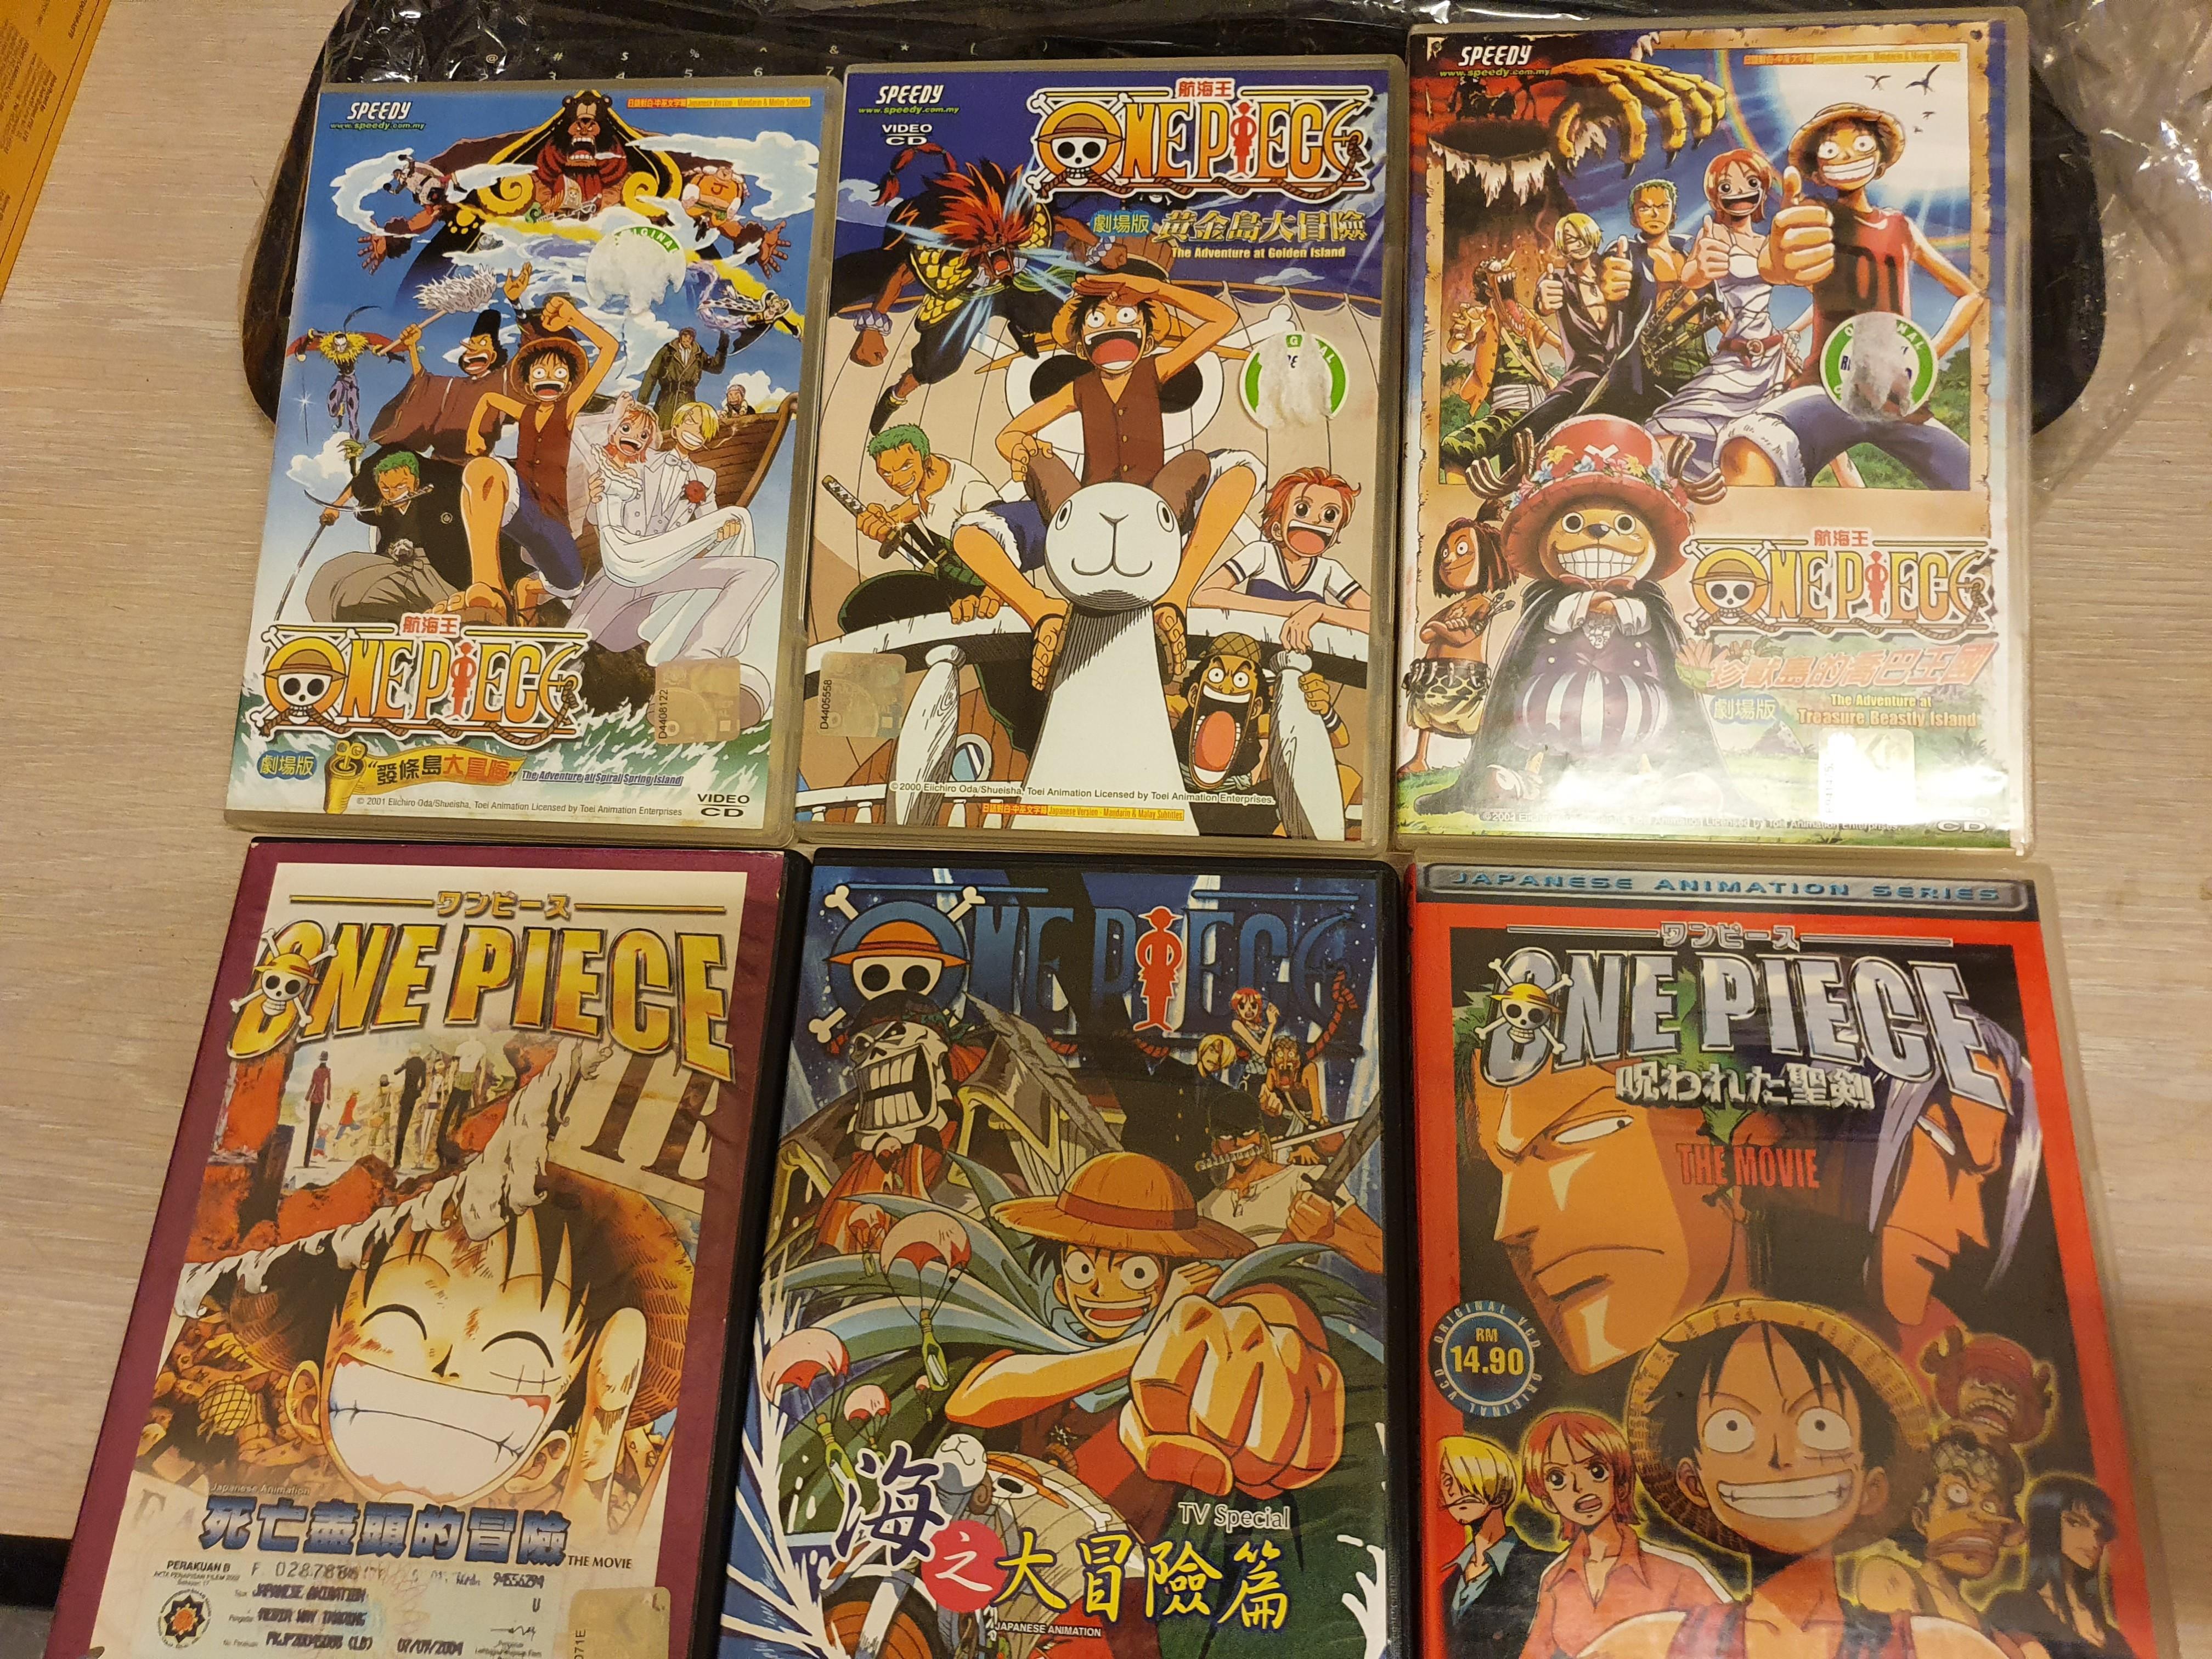 One Piece Movie Vcd 6 Titles Music Media Cd S Dvd S Other Media On Carousell